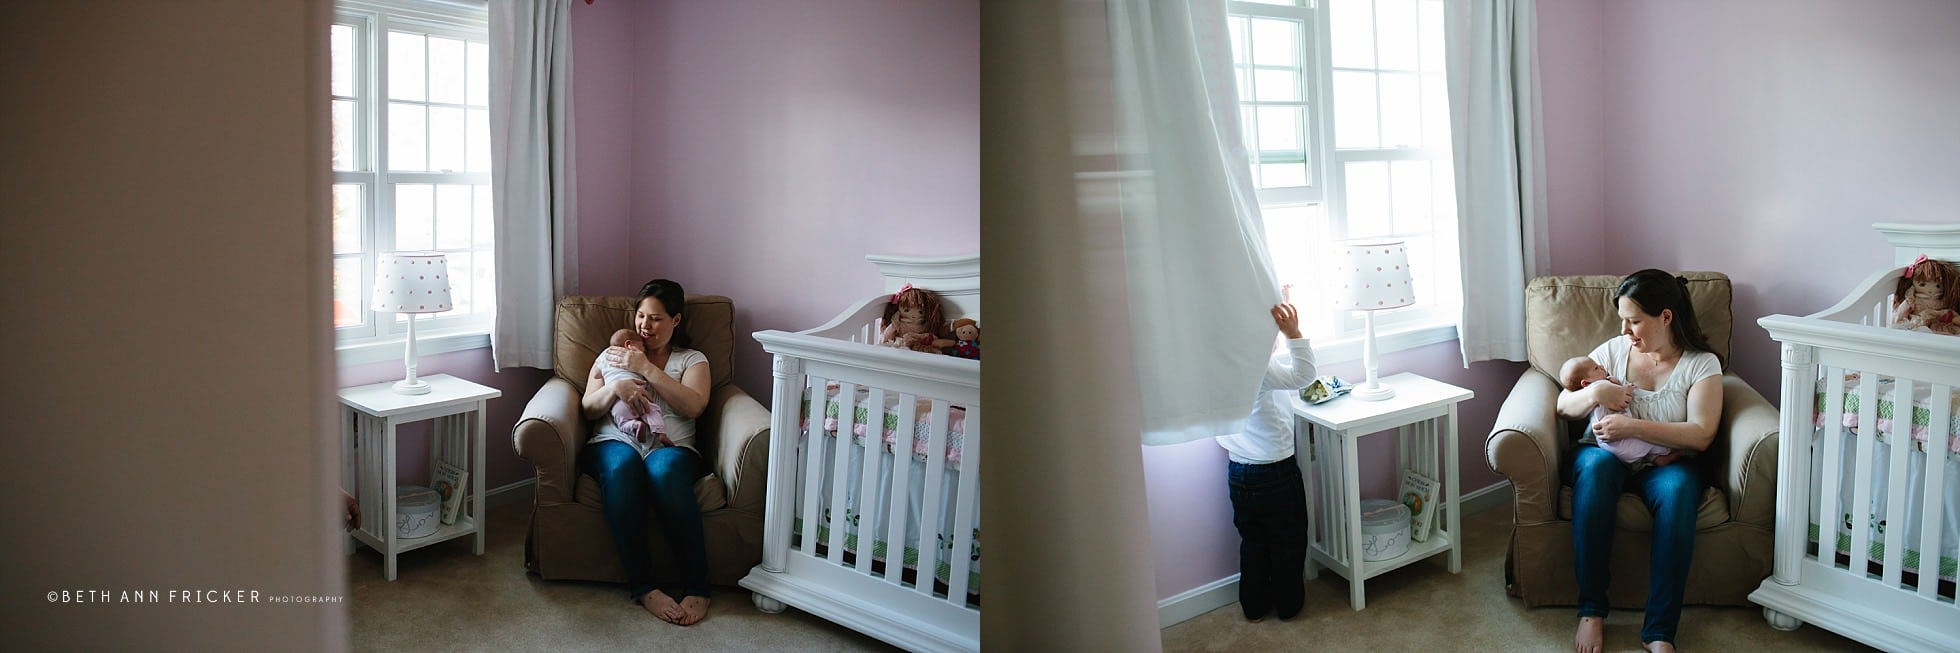 mom with newborn baby girl in rocking chair Boston Baby Photos